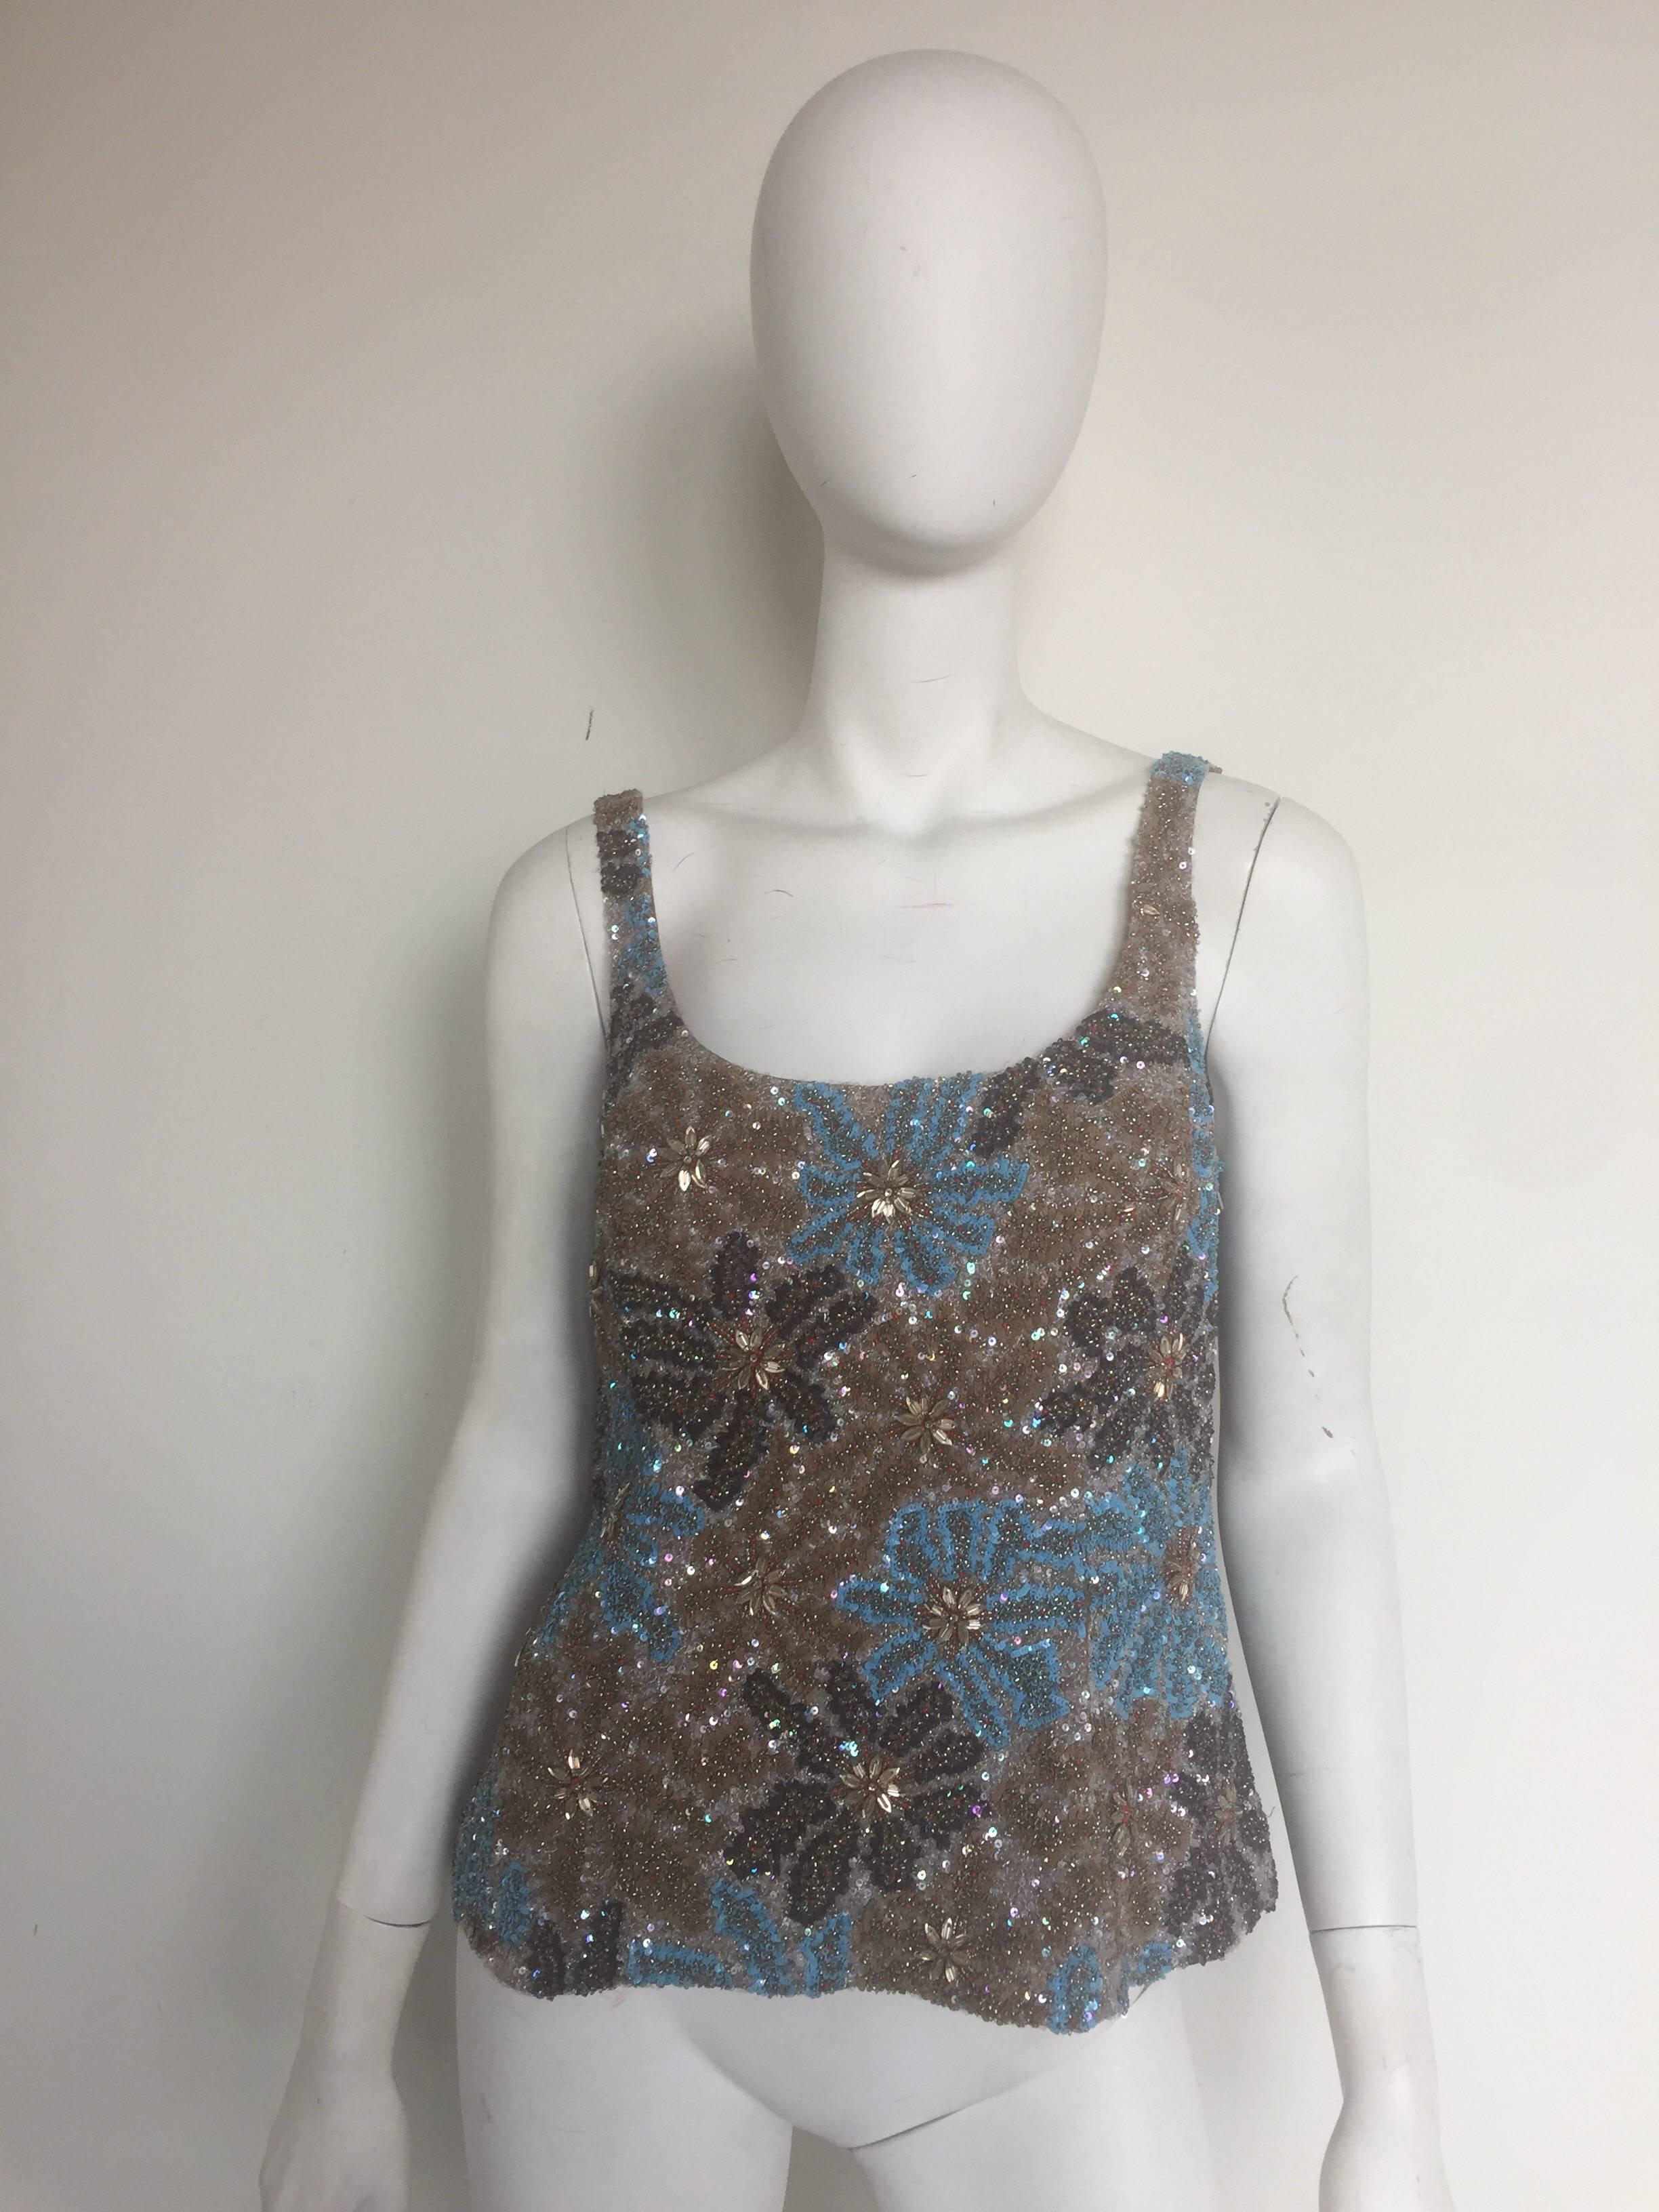 Carolina Herrera gold and blue beaded floral top and skirt ensemble  In Excellent Condition For Sale In New York, NY